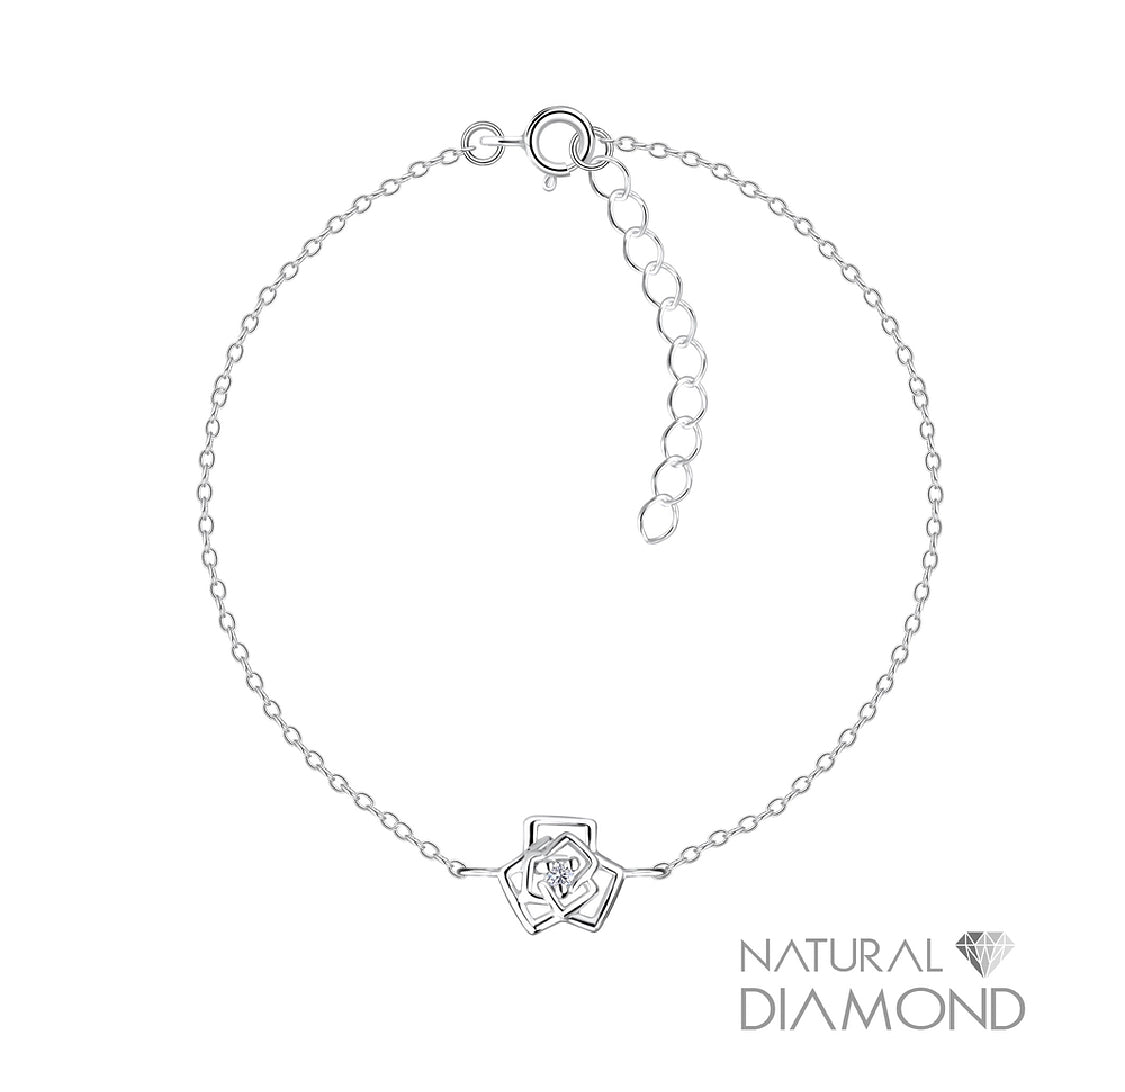 Rose Flower Bracelet With Natural Diamond for Kids and Teens